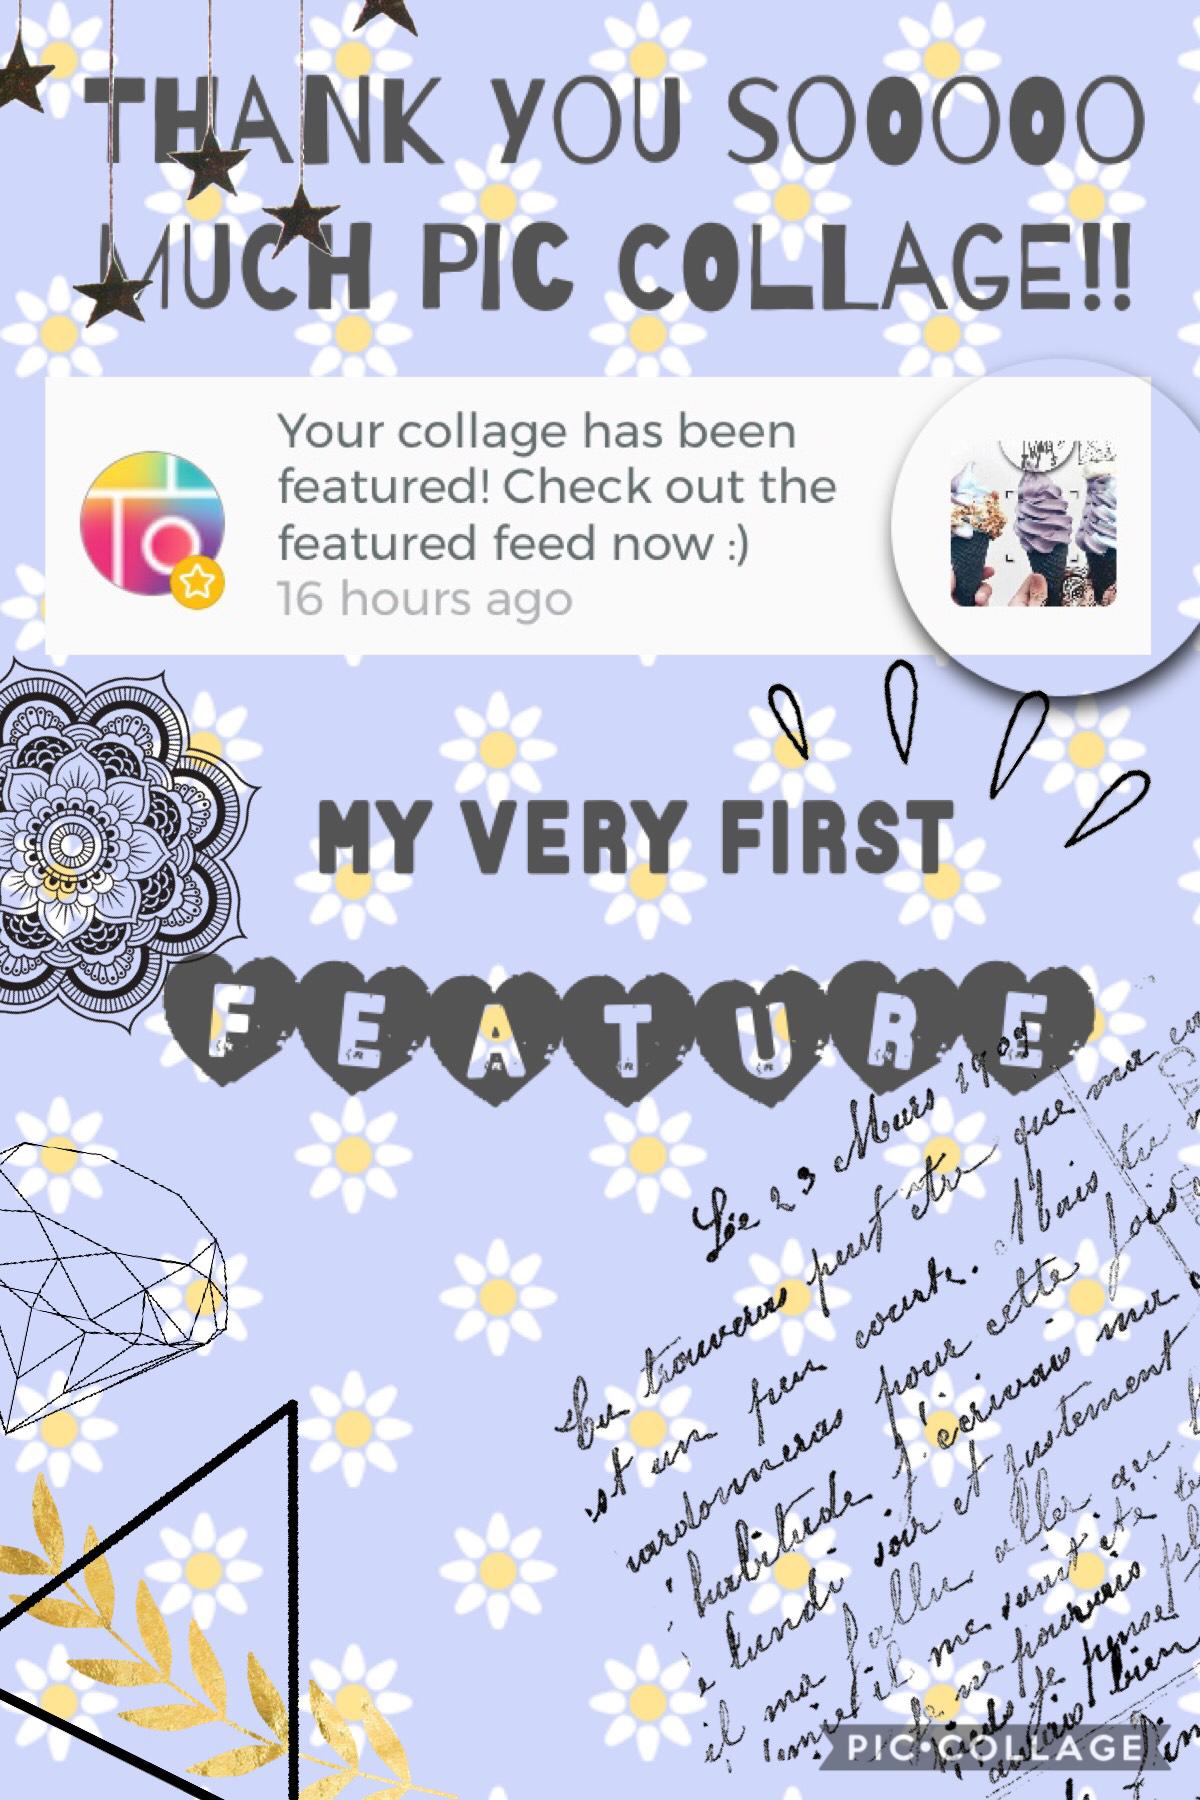 MY VERY FIRST FEATURE!!!!
 thank u piccollage SOOOO much!!❤️❤️ I really can’t believe this!! I’m still hyperventilating... well sorta 😂😂 love u guys!!❤️